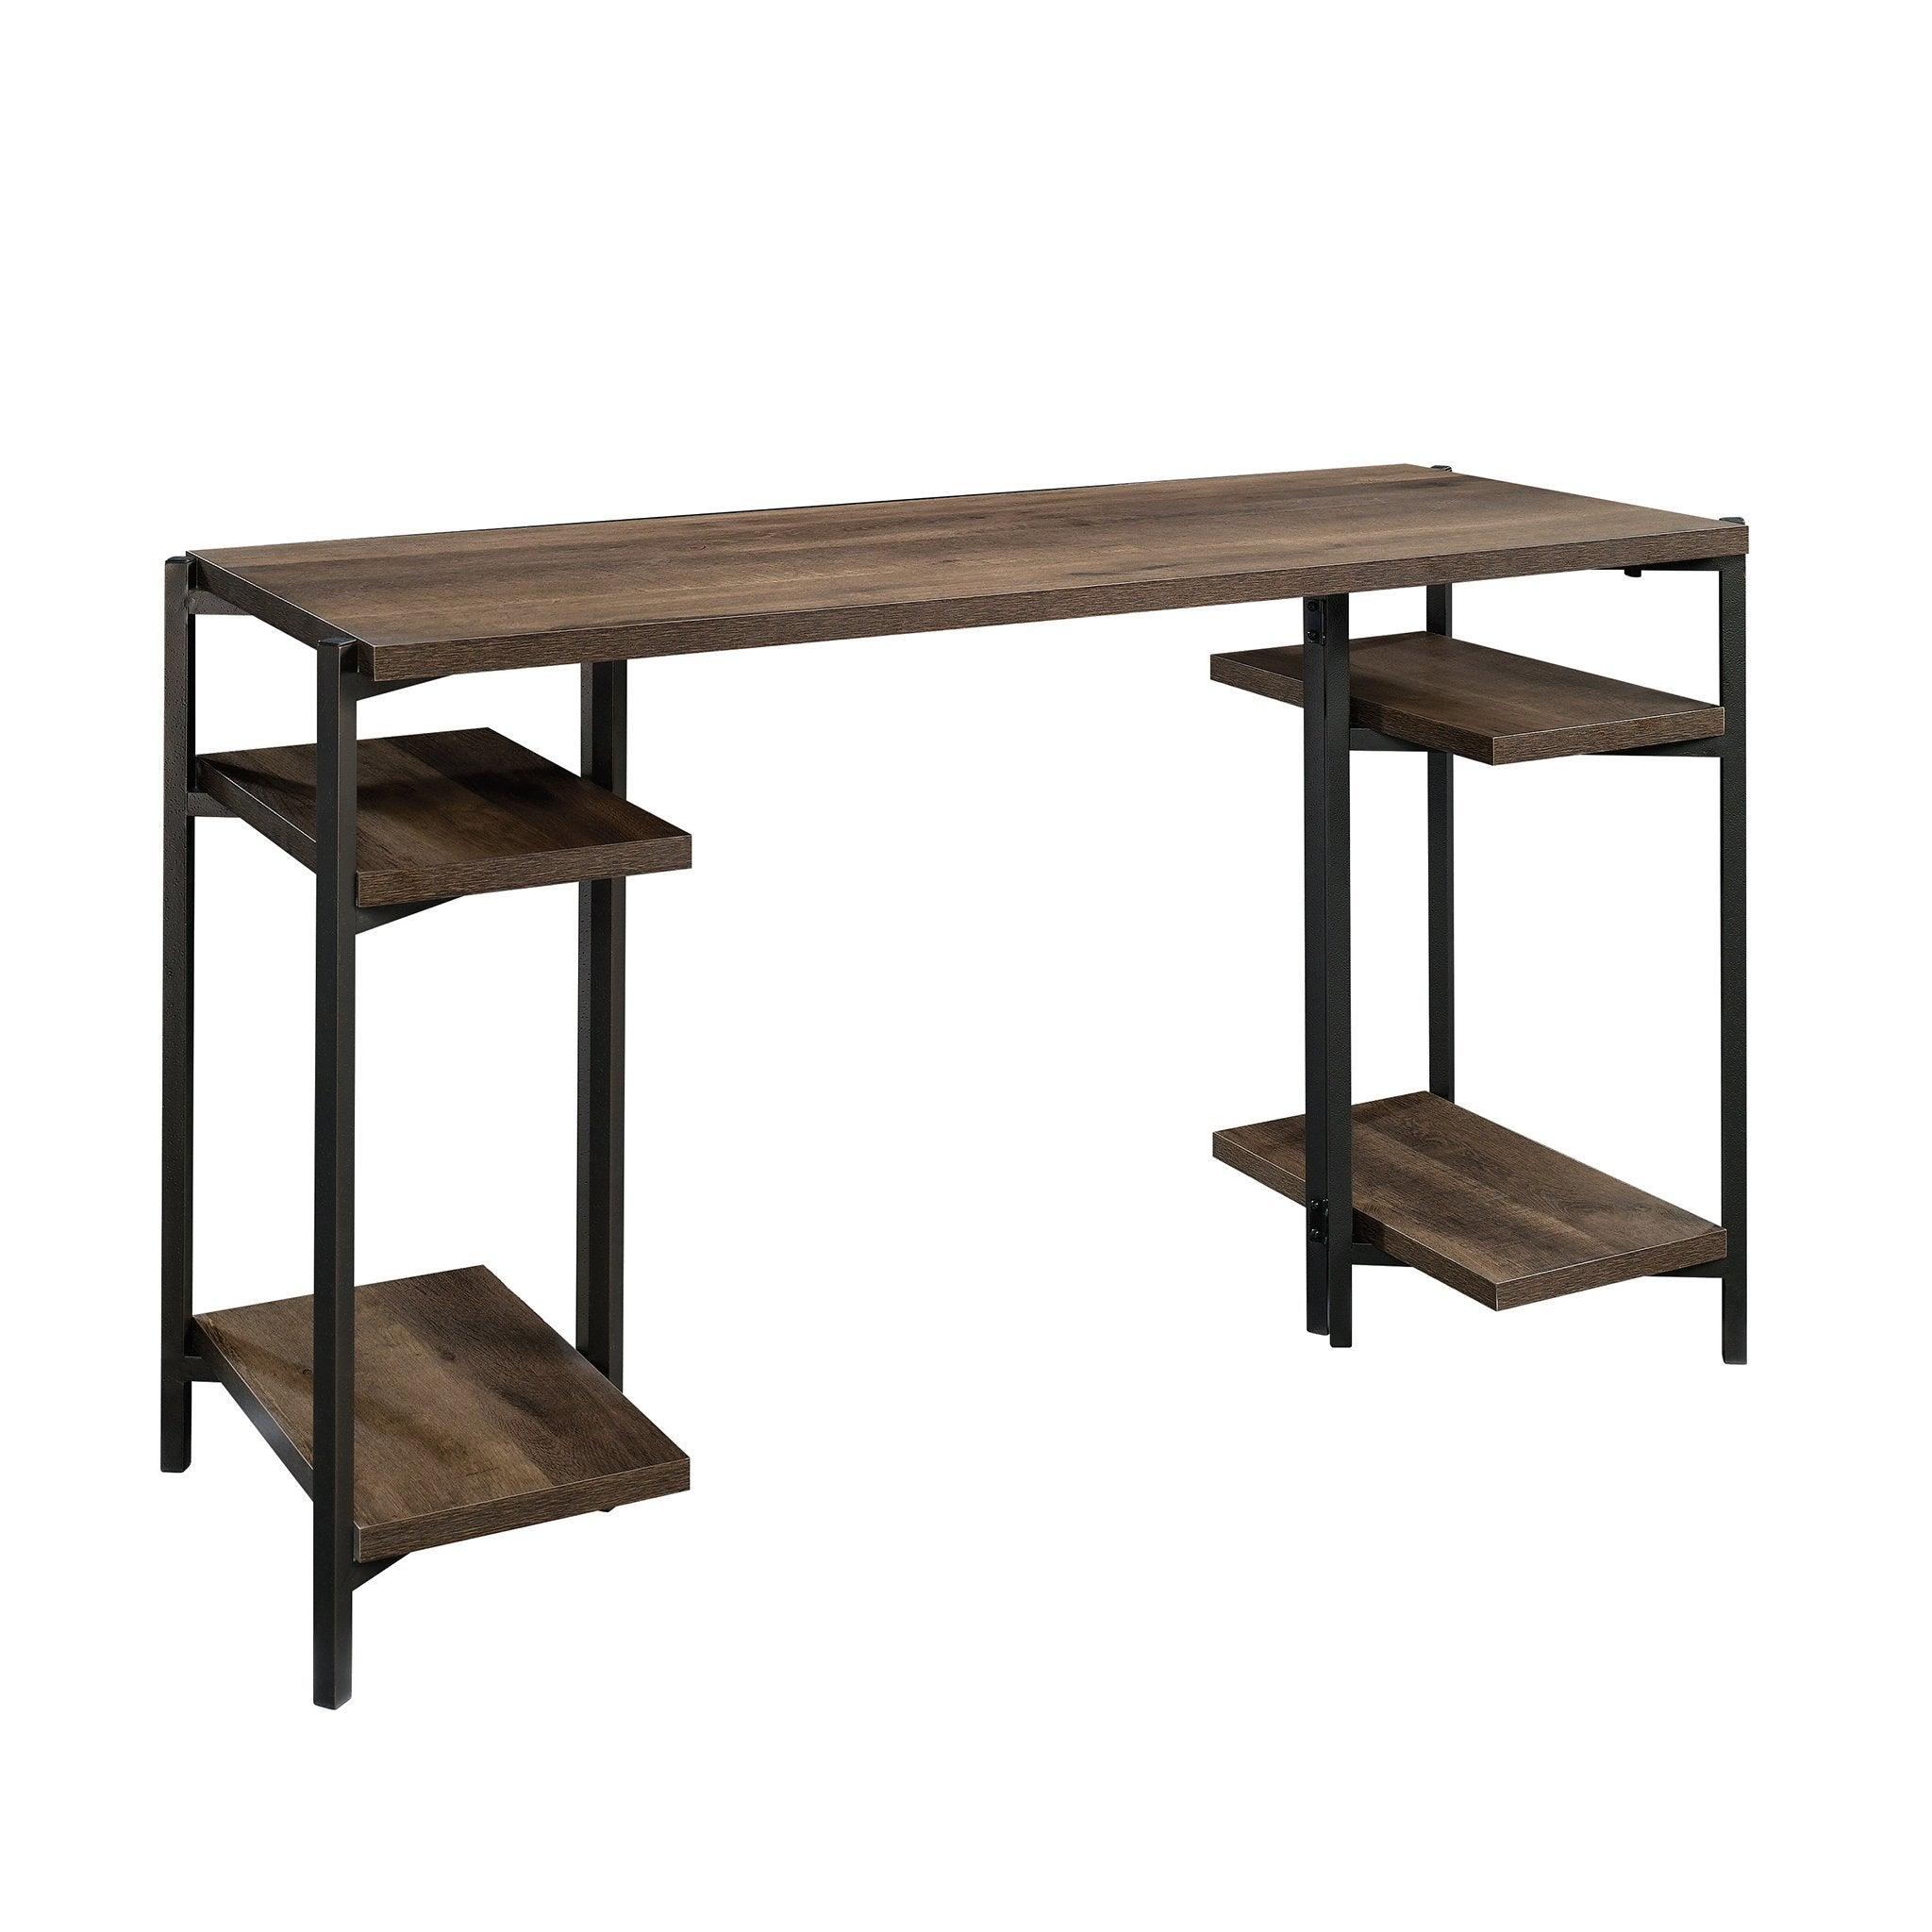 Chunky industrial bench desk smoked oak - image 7